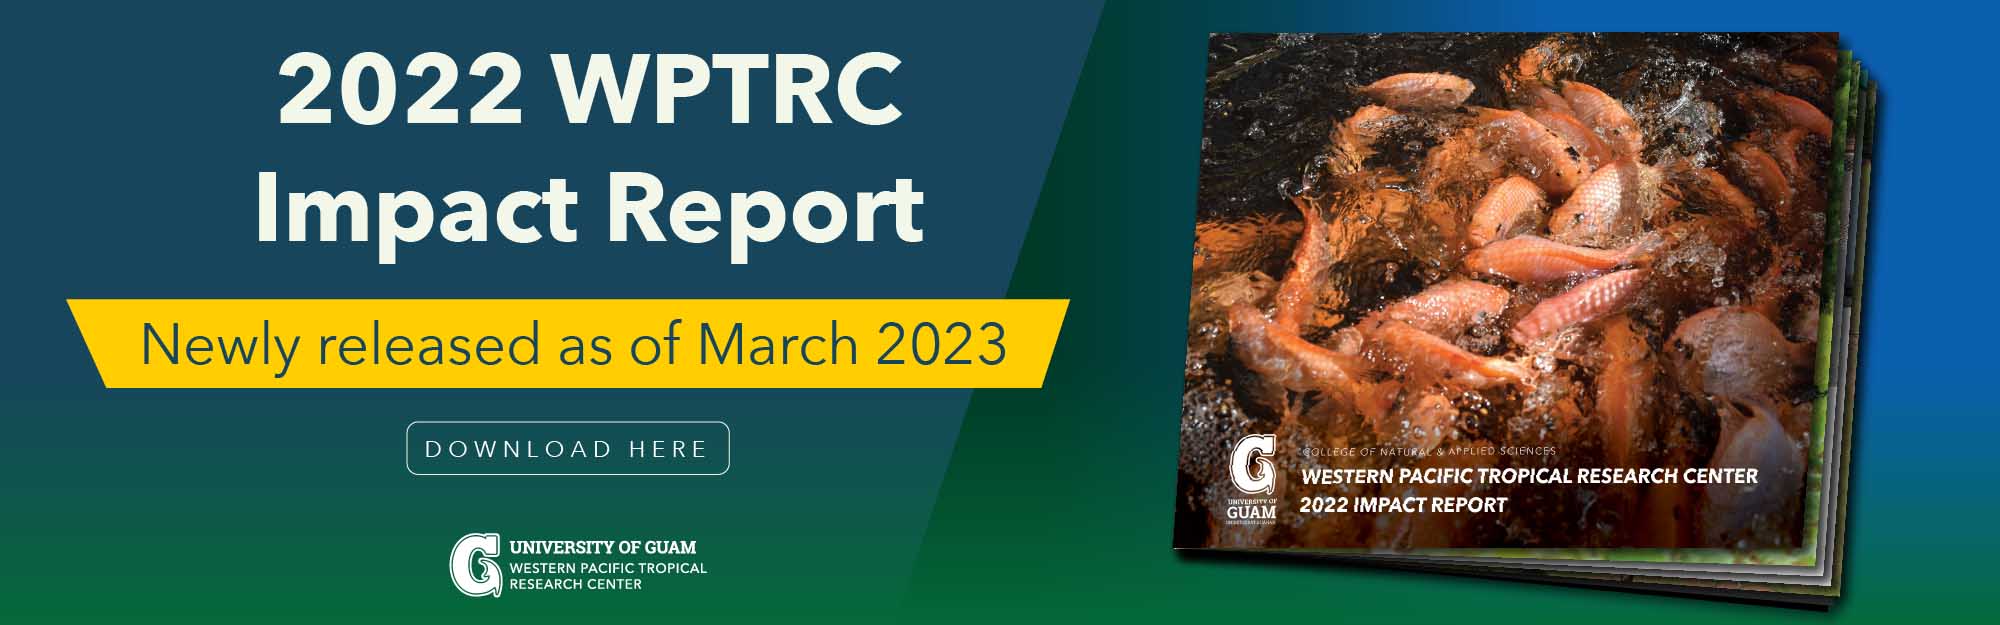 Banner for 2022 WPTRC Impact Report